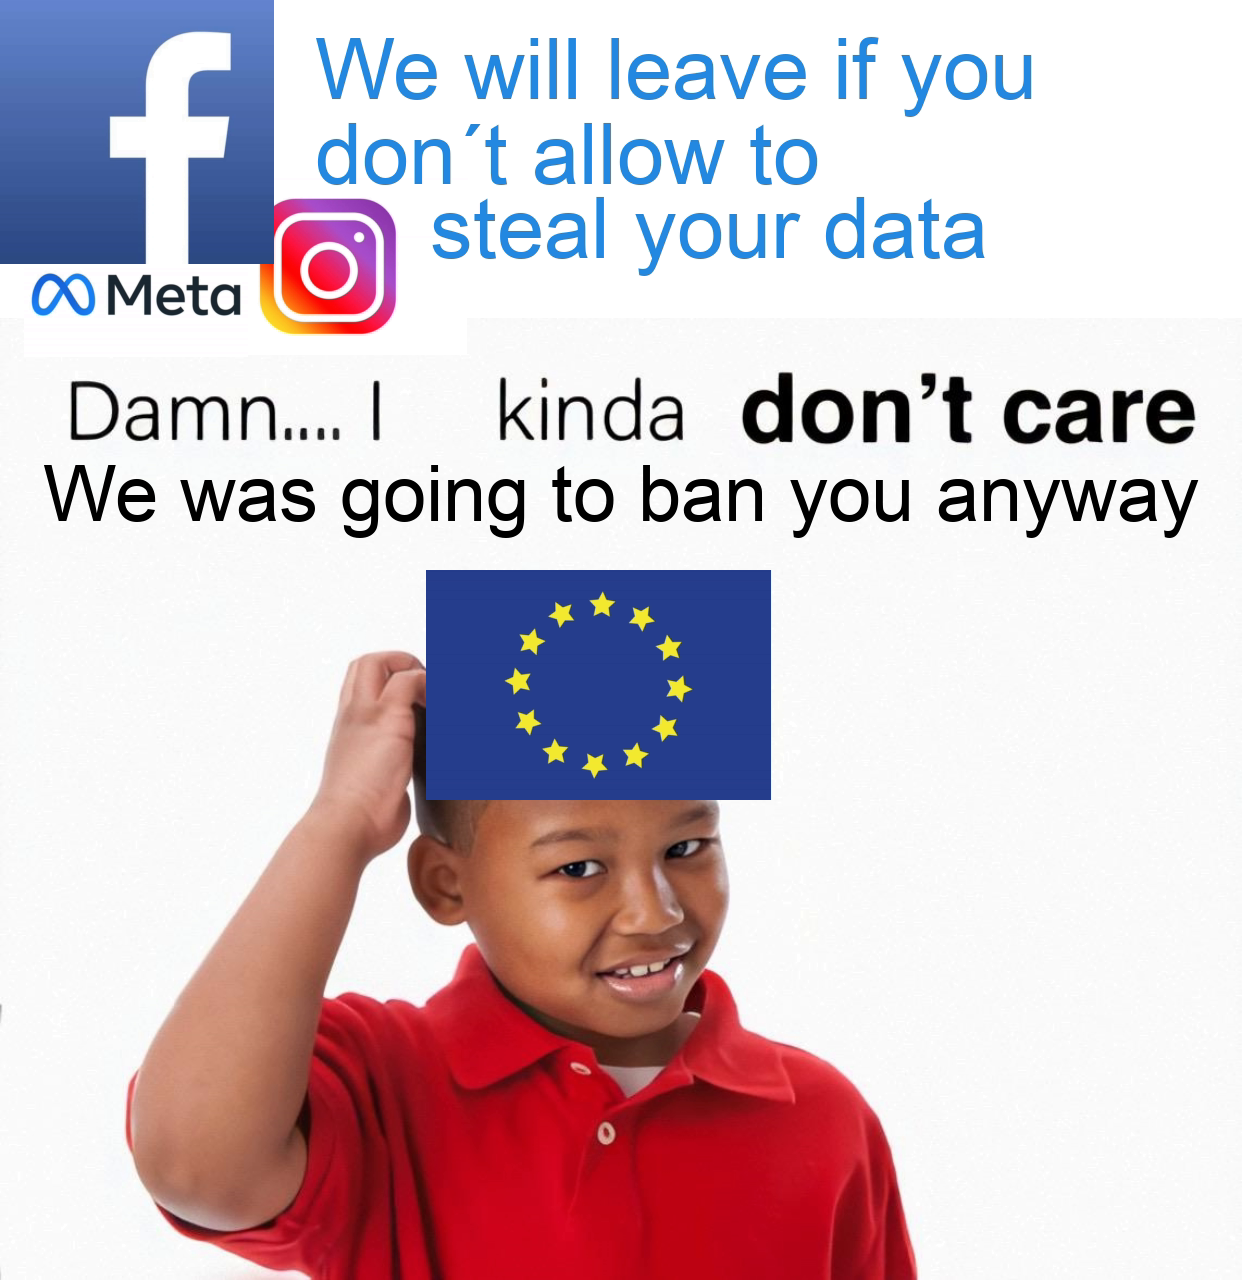 facebook 2004 - f We will leave if you don't allow to steal your data Meta Damn.... I kinda don't care We was going to ban you anyway